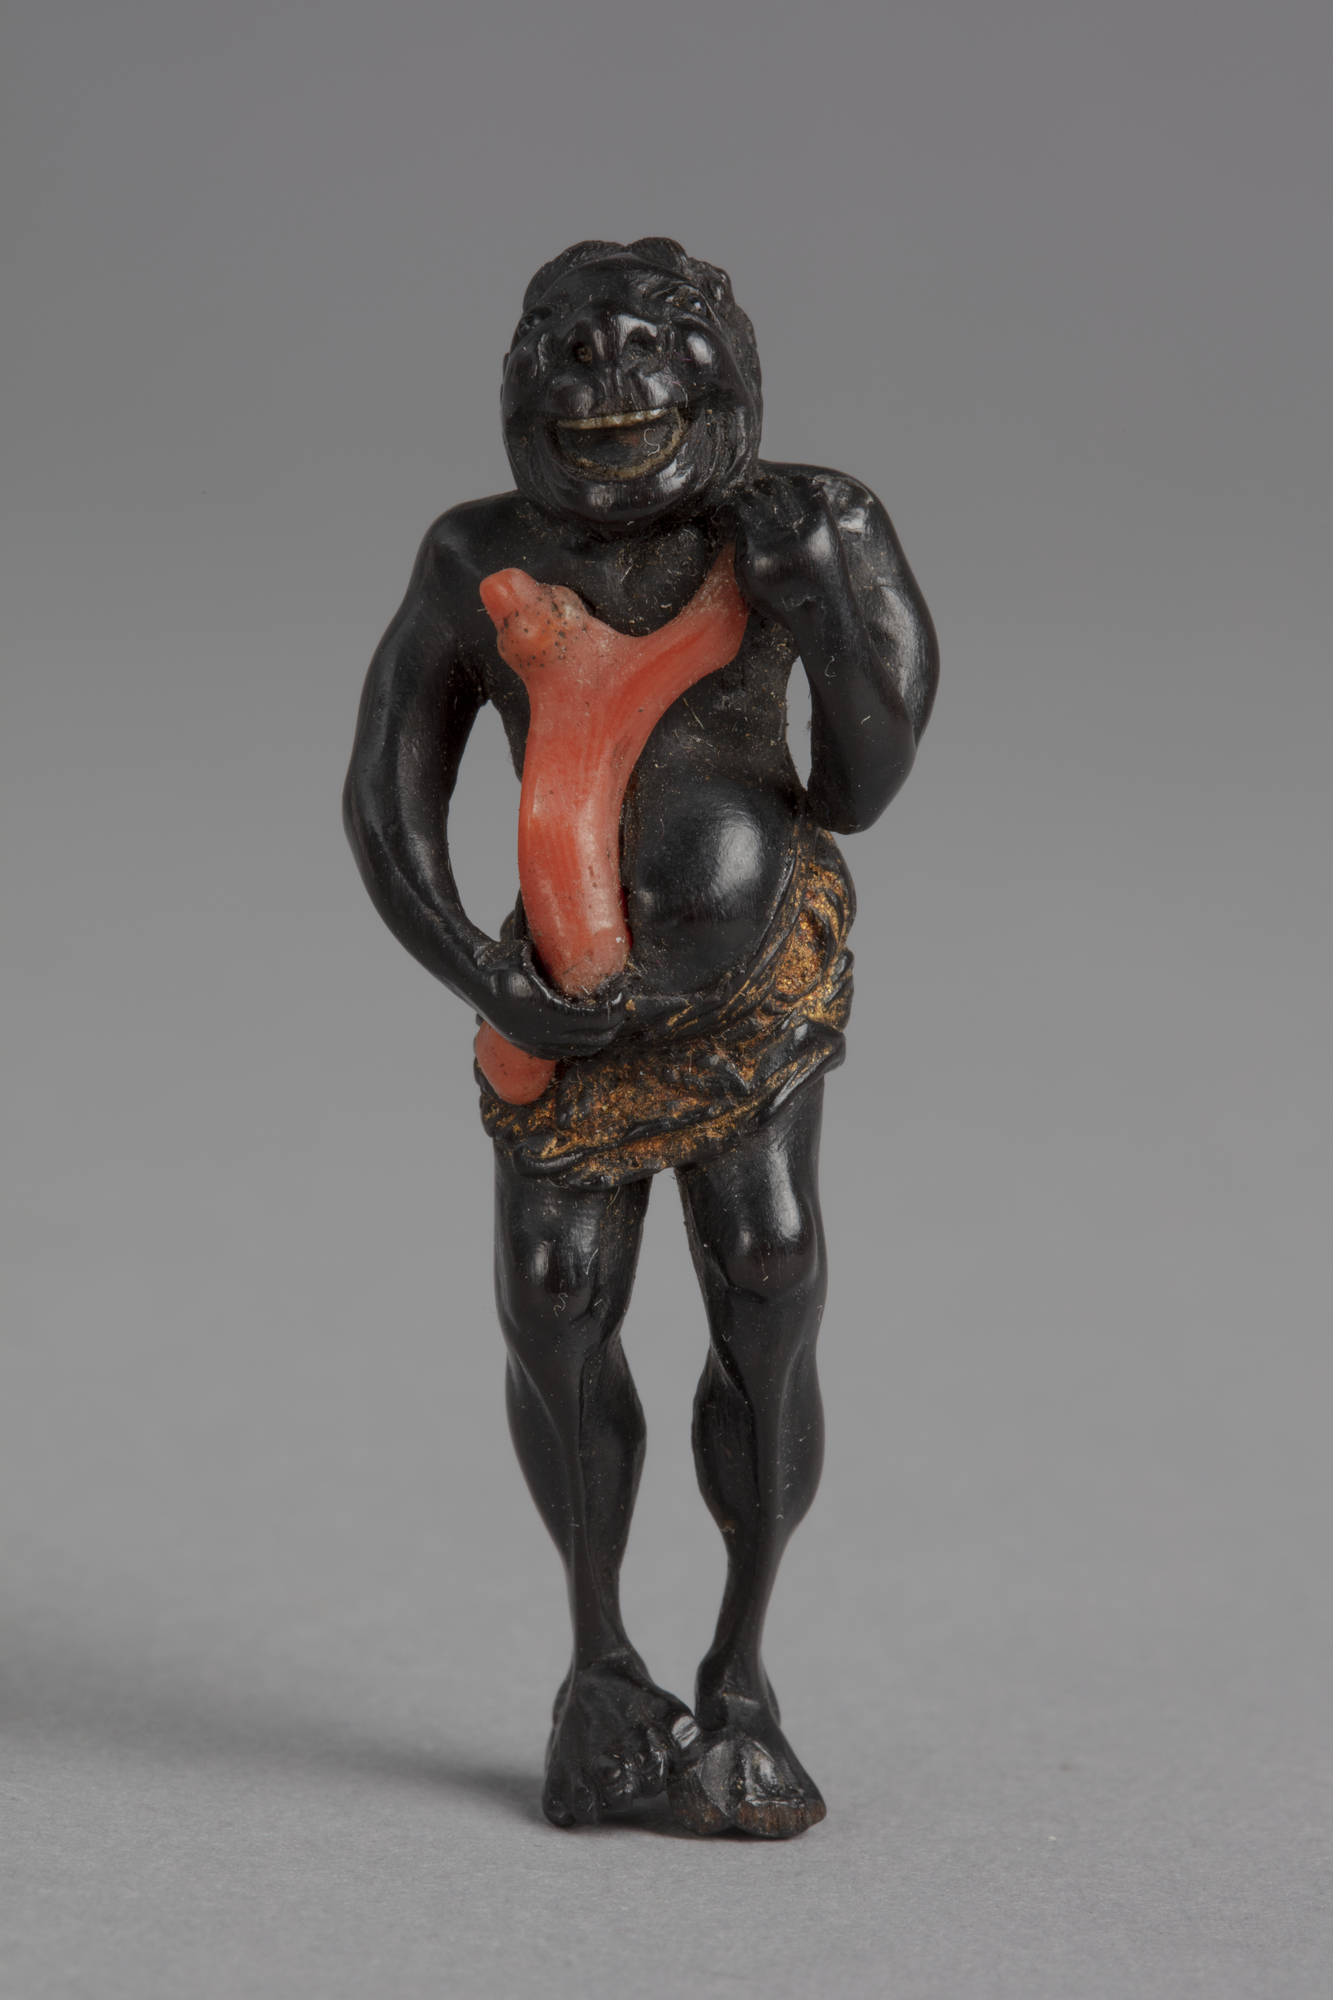 A Japanese ebony netsuke of a Black man wearing a gold loincloth holding a large branch of coral to his chest.